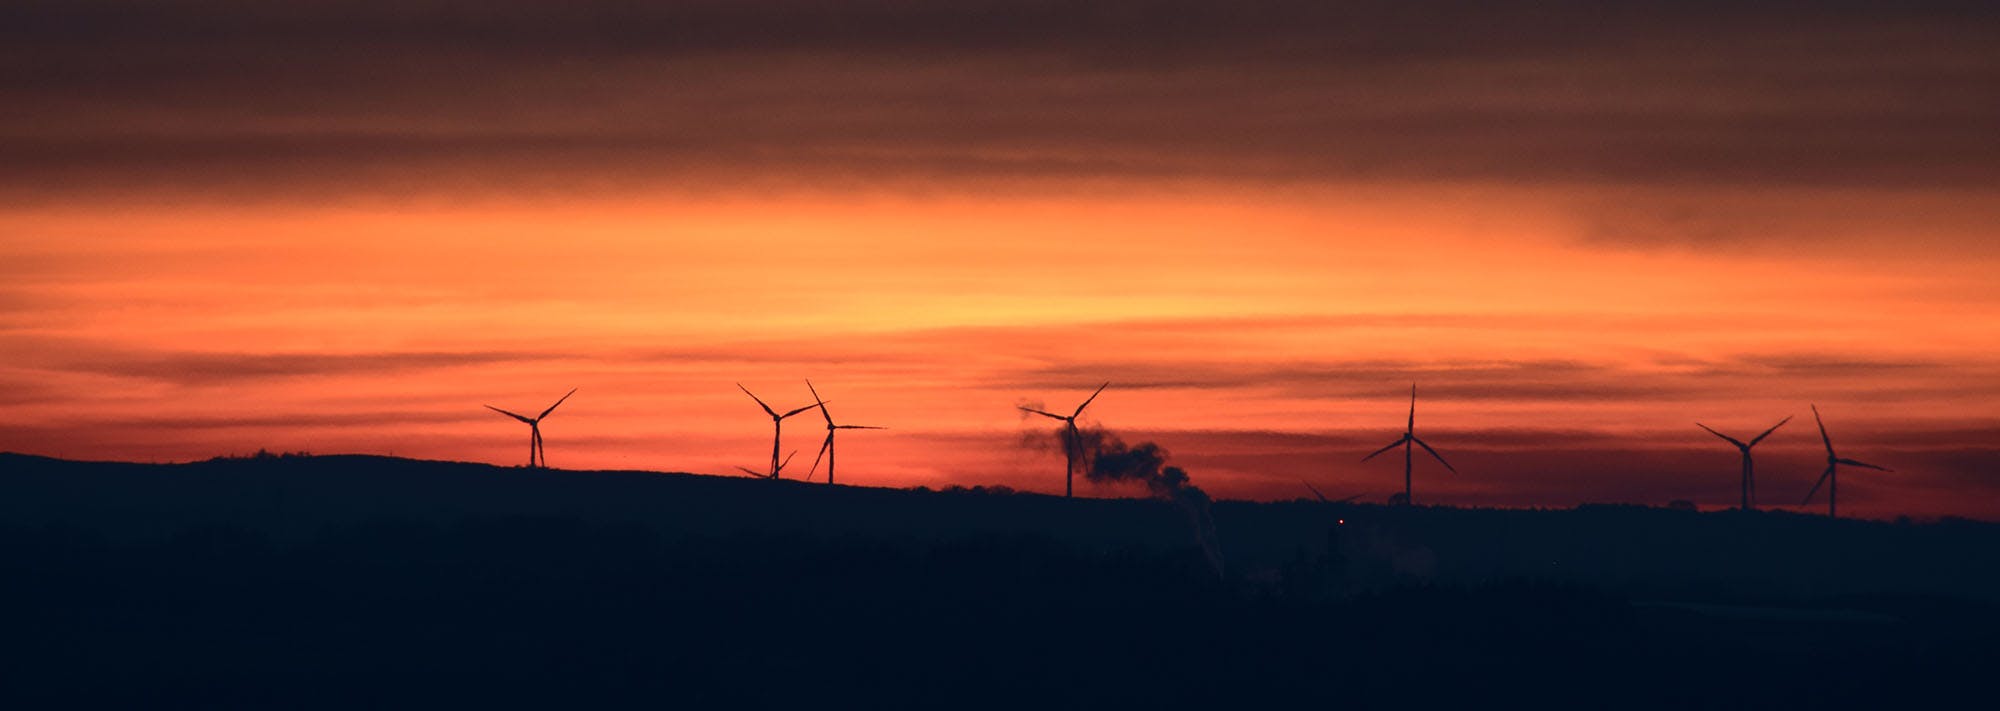 Sunset landscape with wind turbine in background